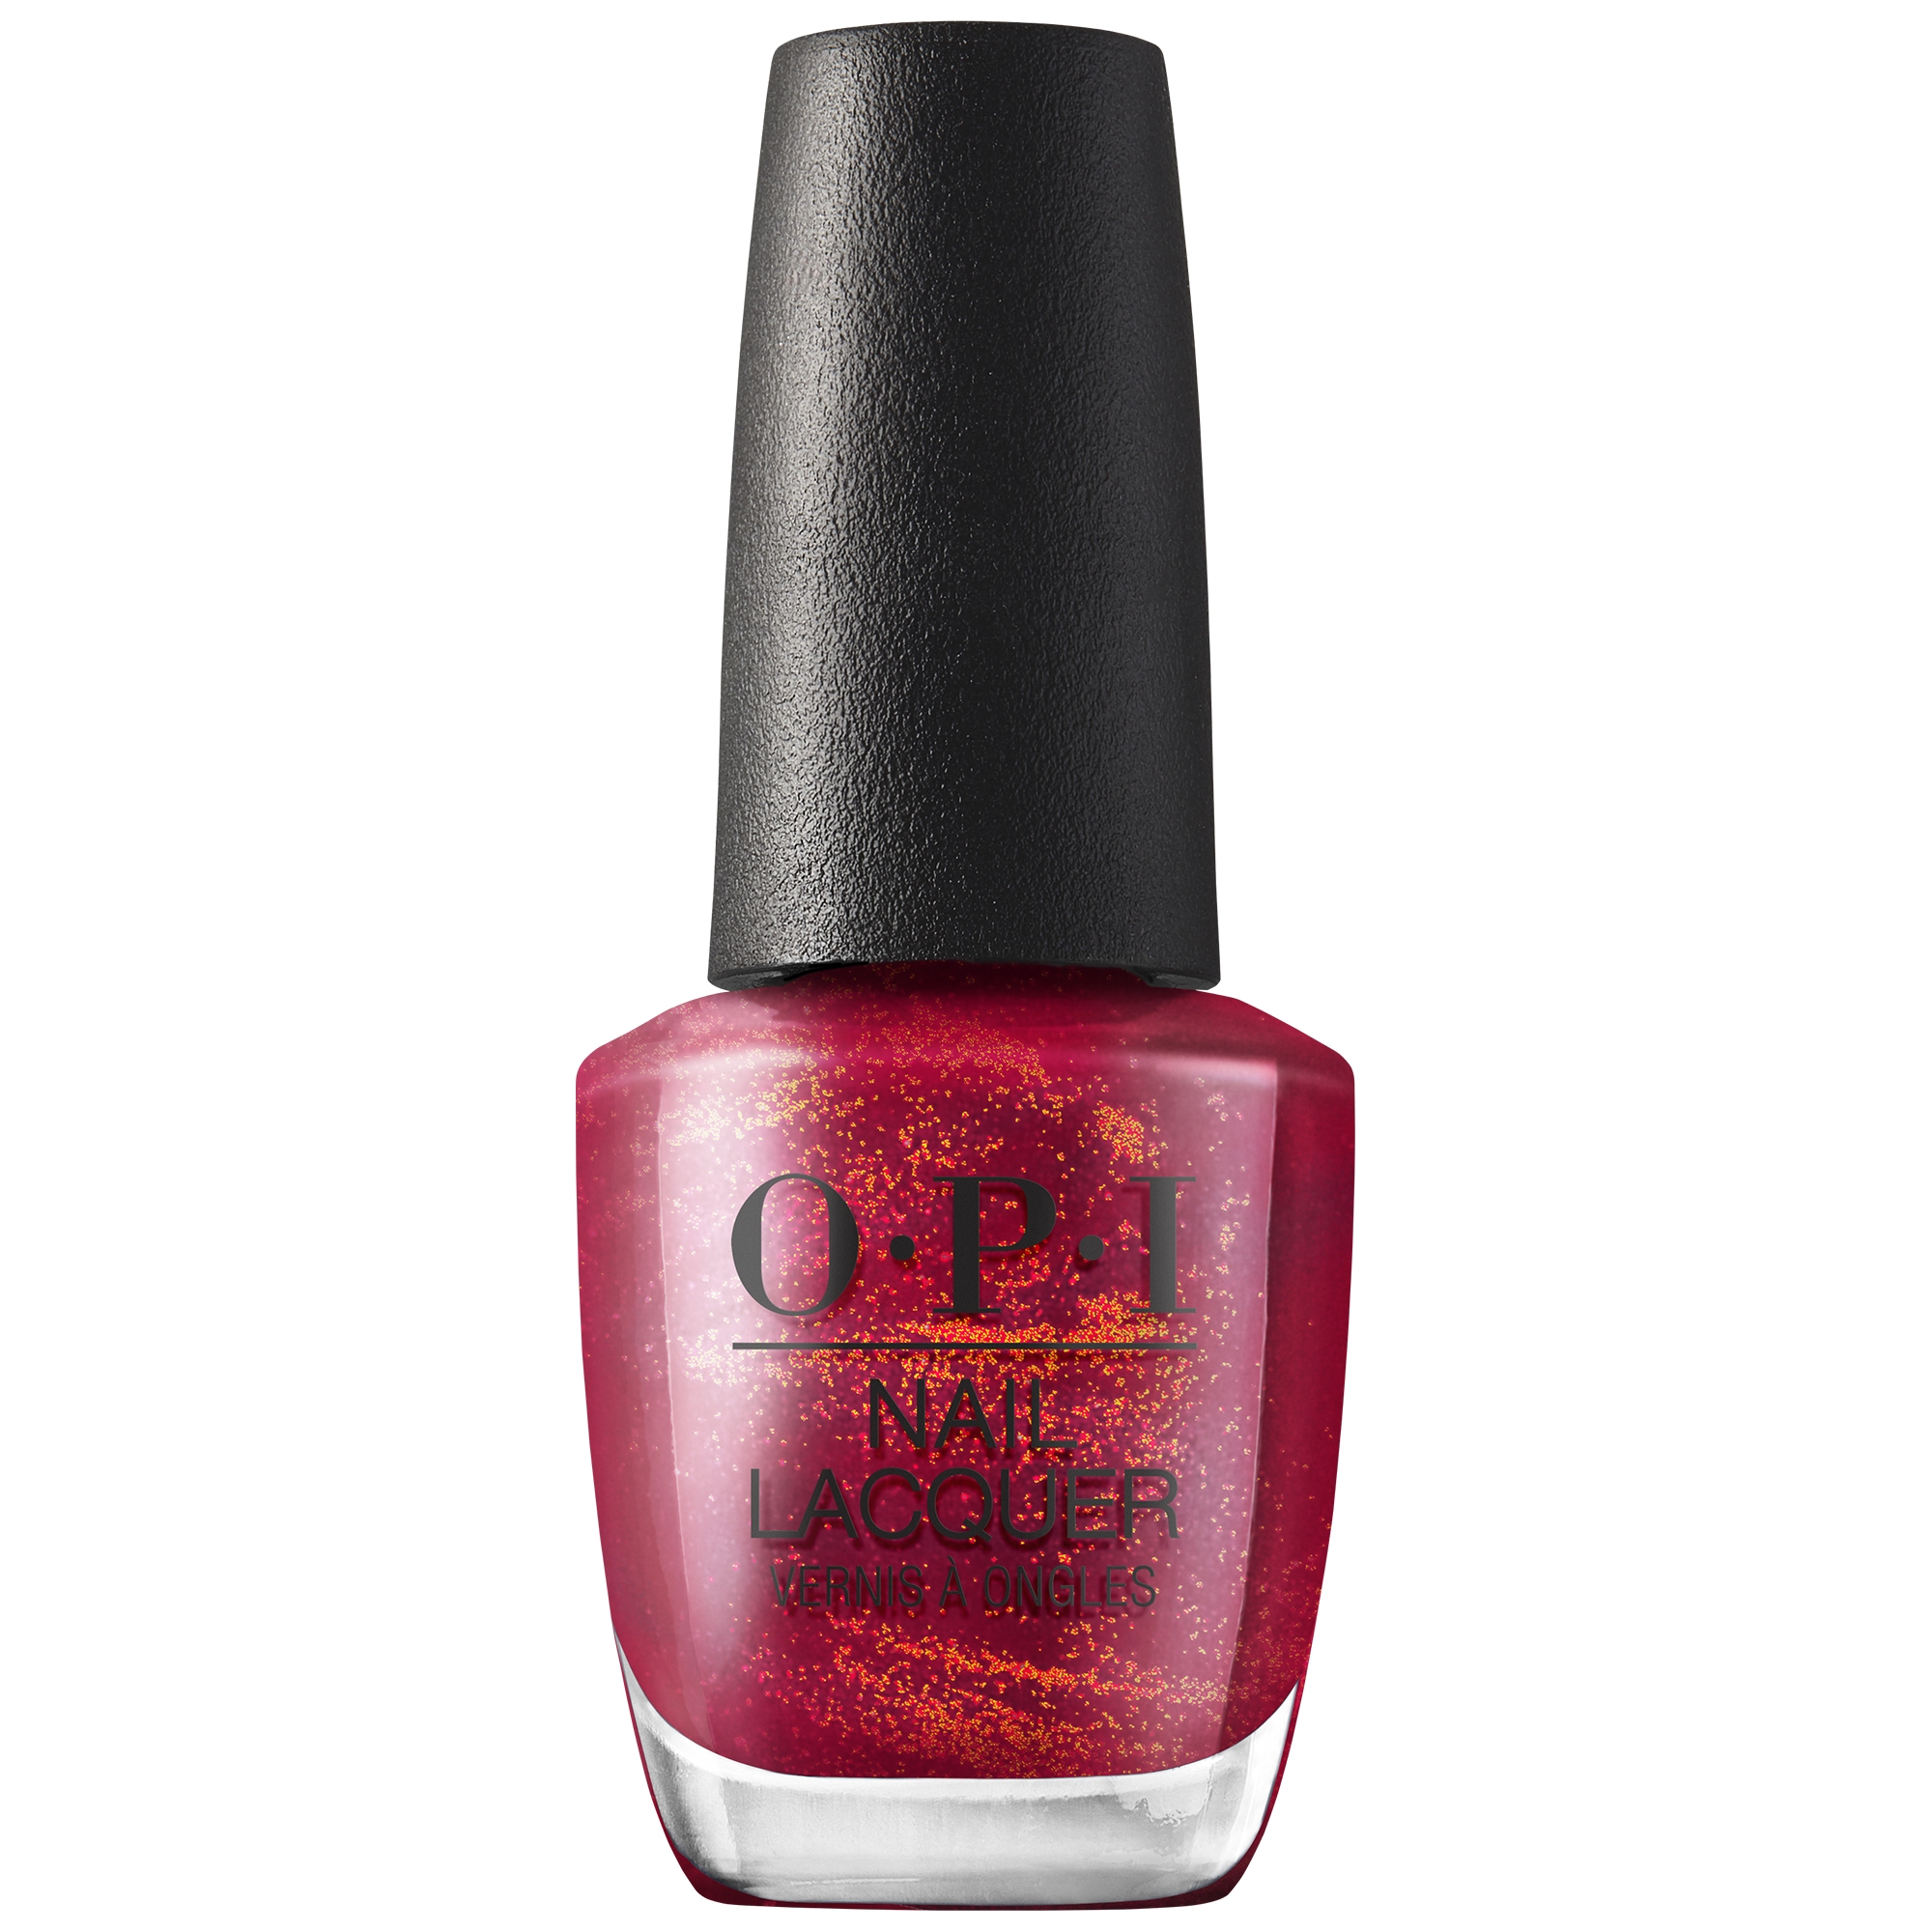 OPI Hollywood Collection: I'm Really an Actress